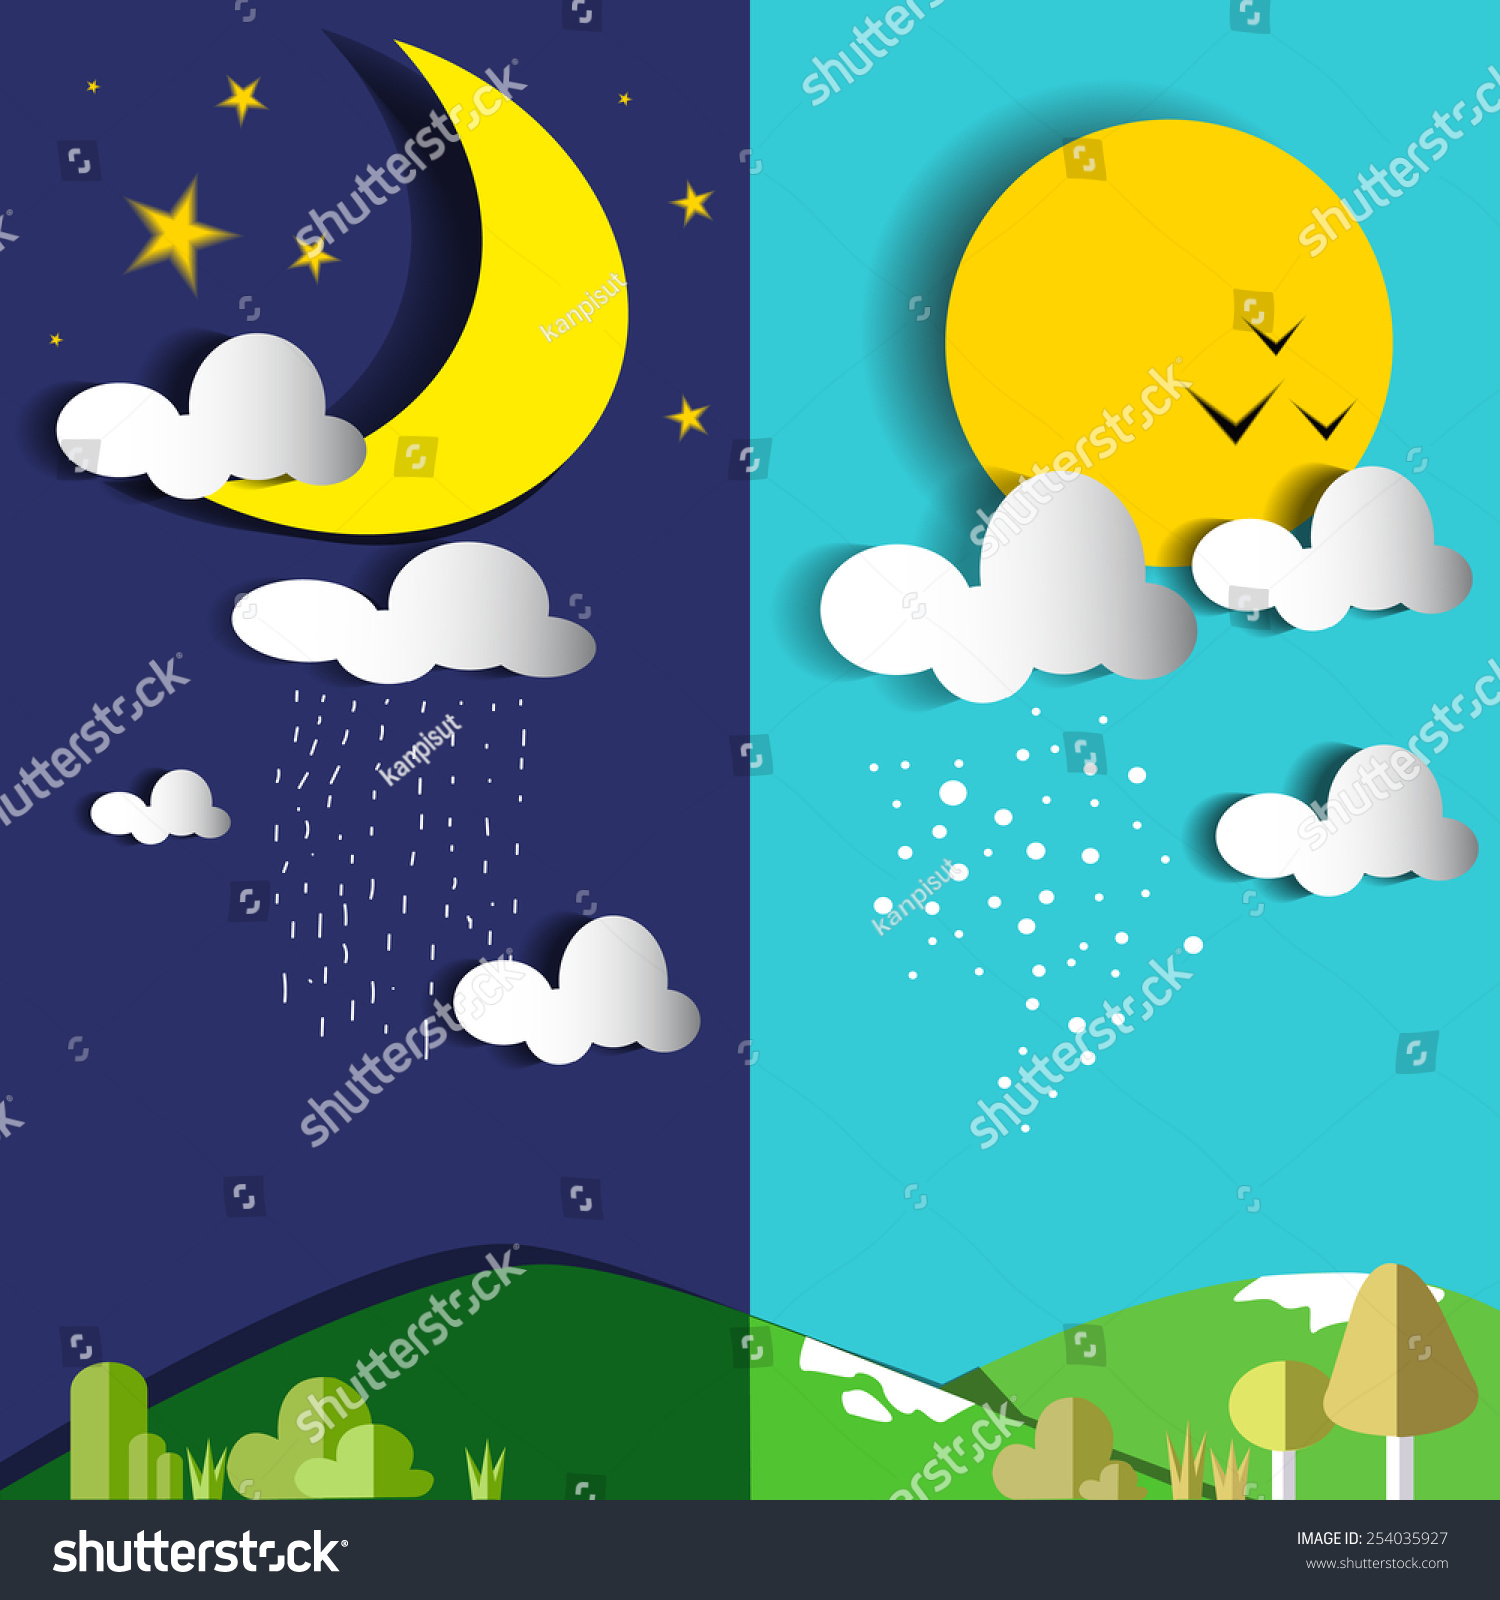 day and night clipart free - photo #10